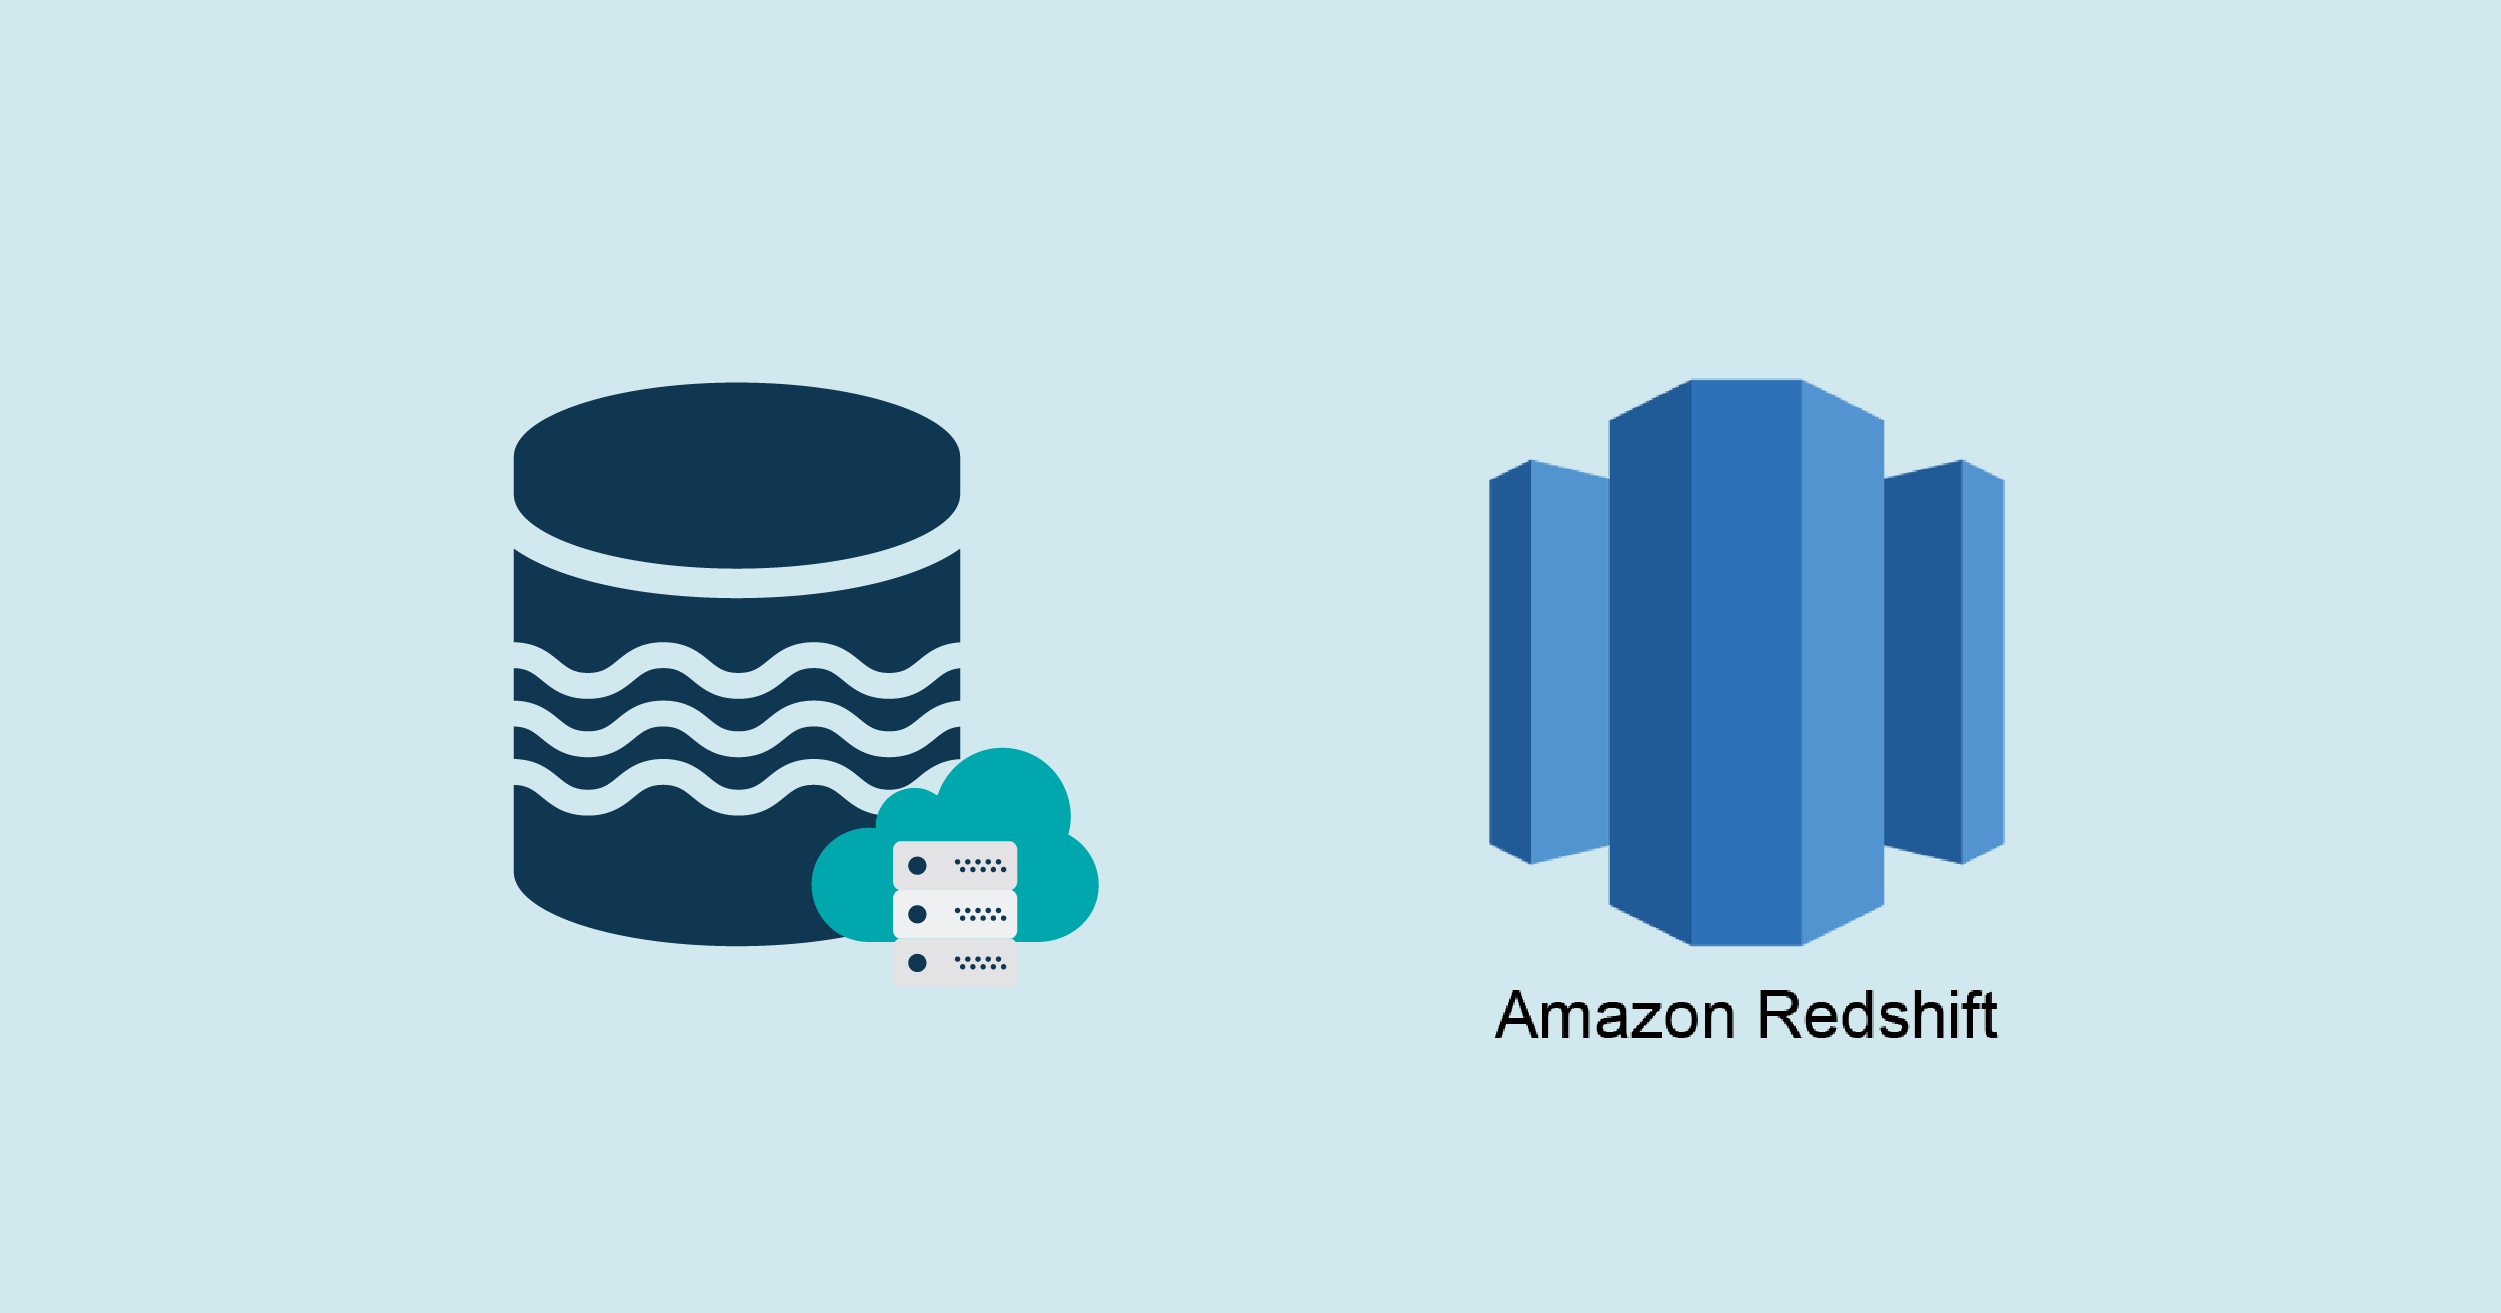 Data Lake Querying in AWS3 Redshift